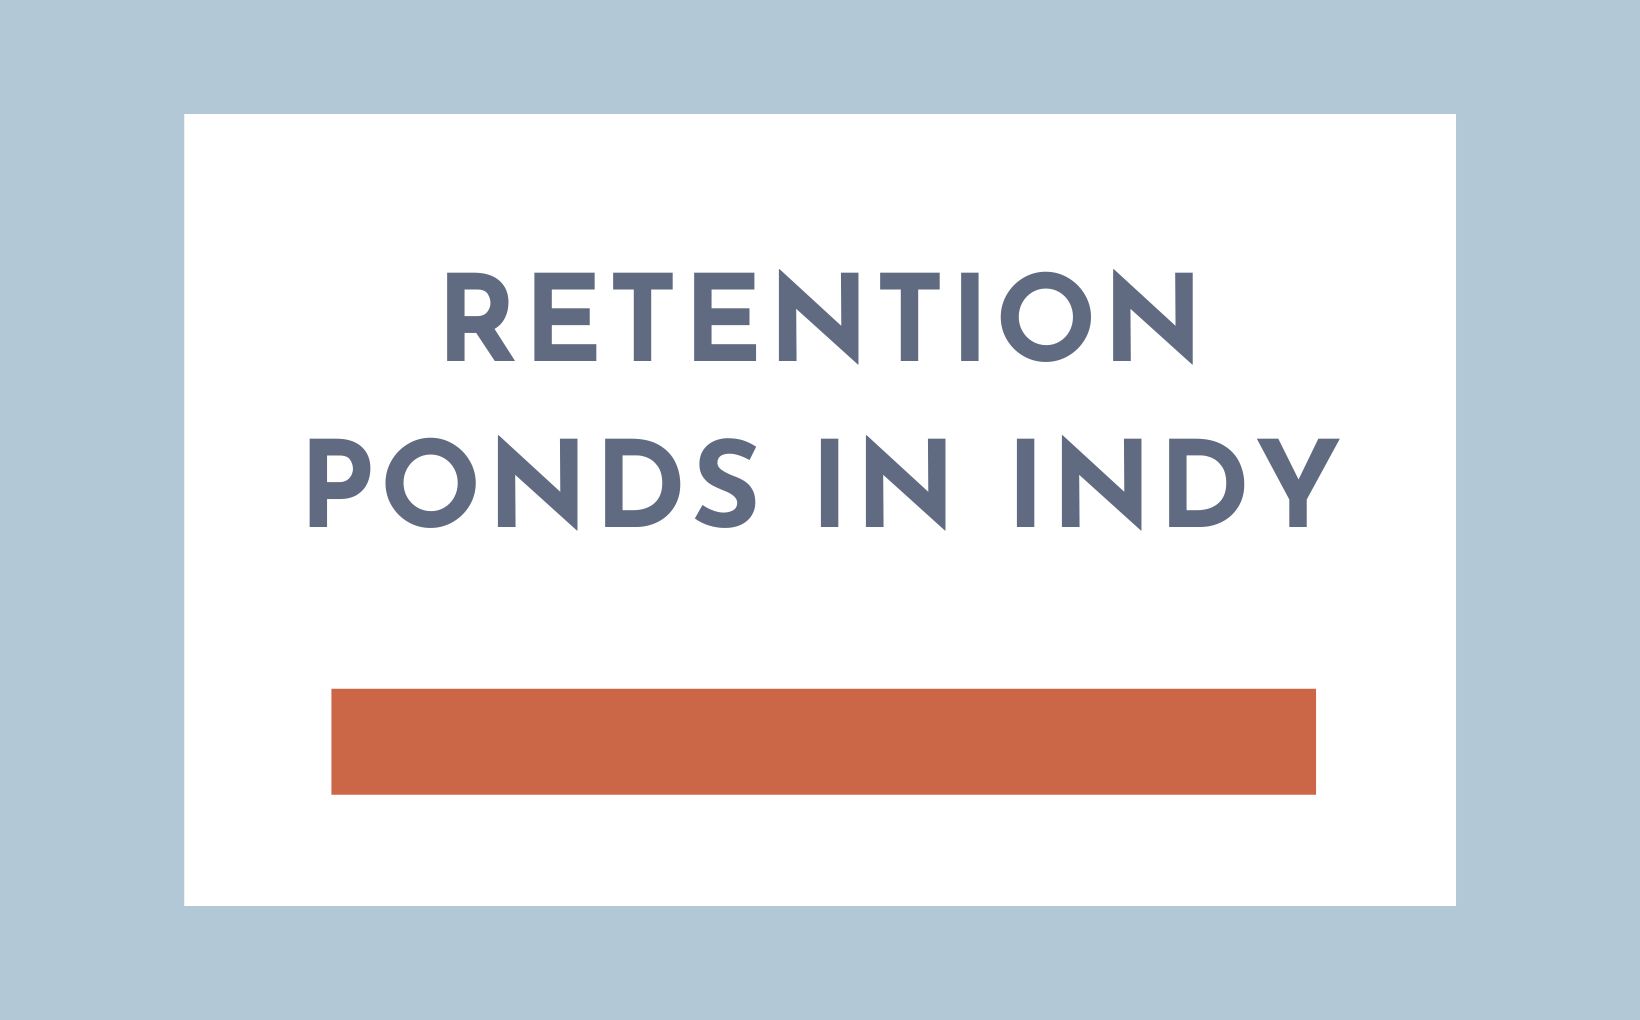 Why are there so many retention ponds in Indianapolis feature image